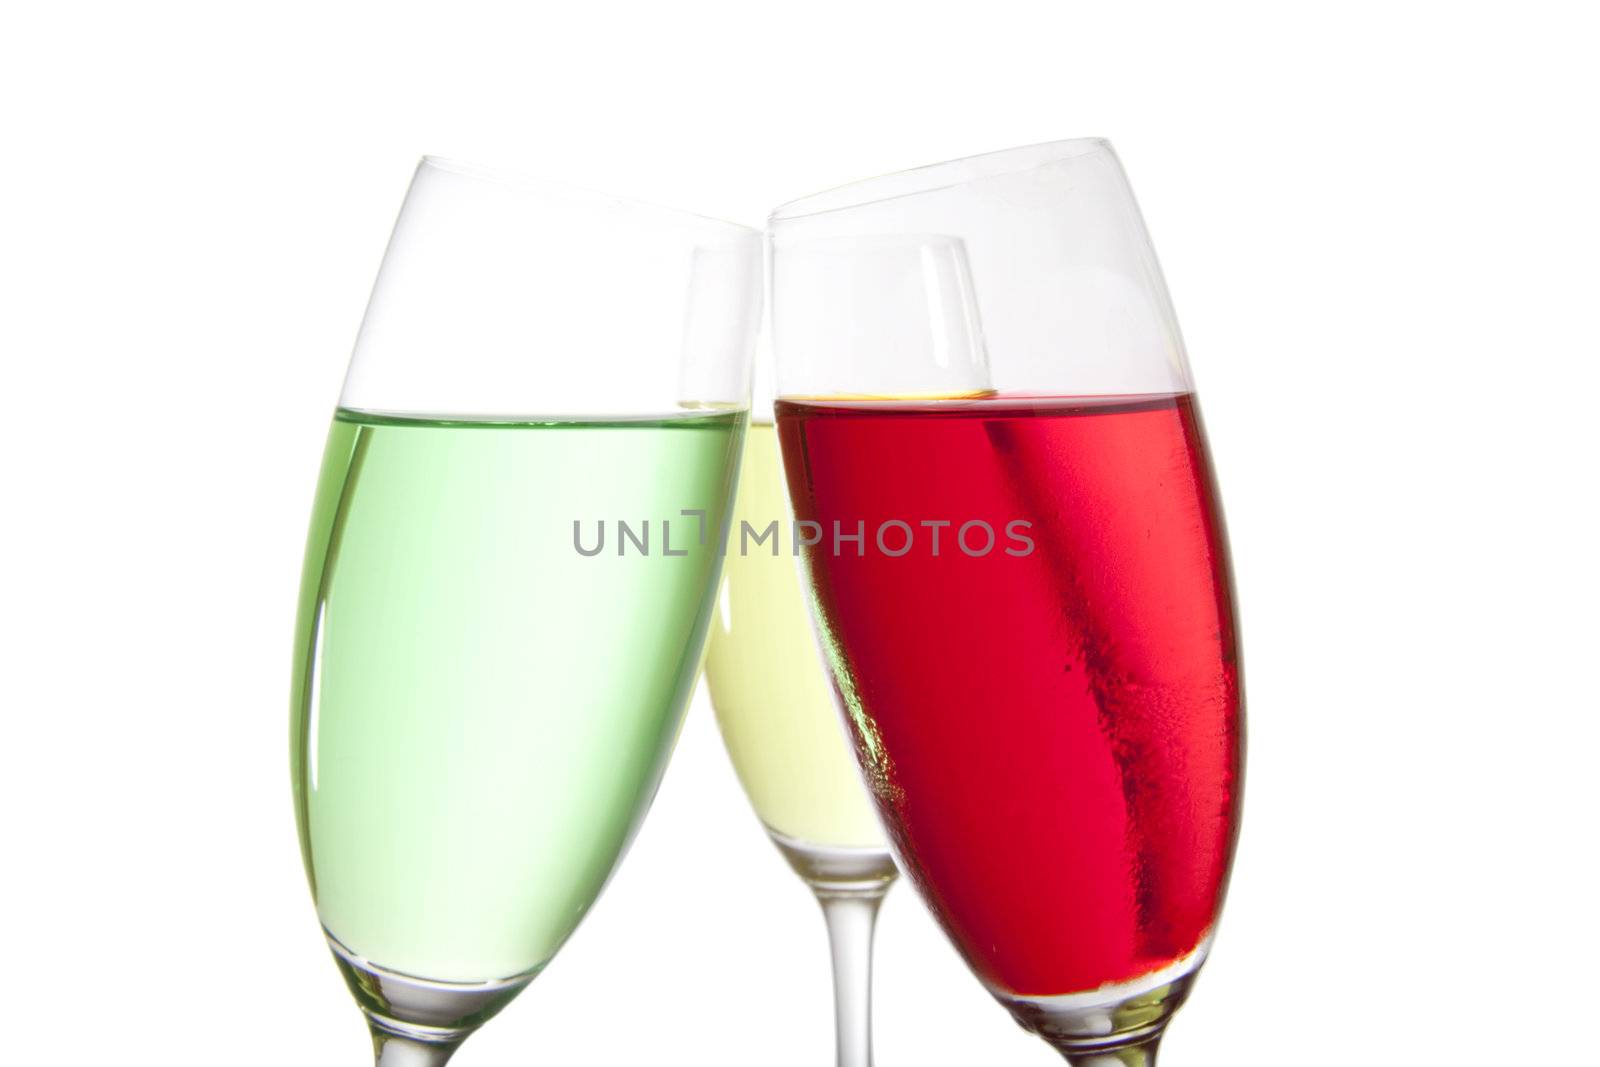 Toast of colorful drinks by kaferphoto